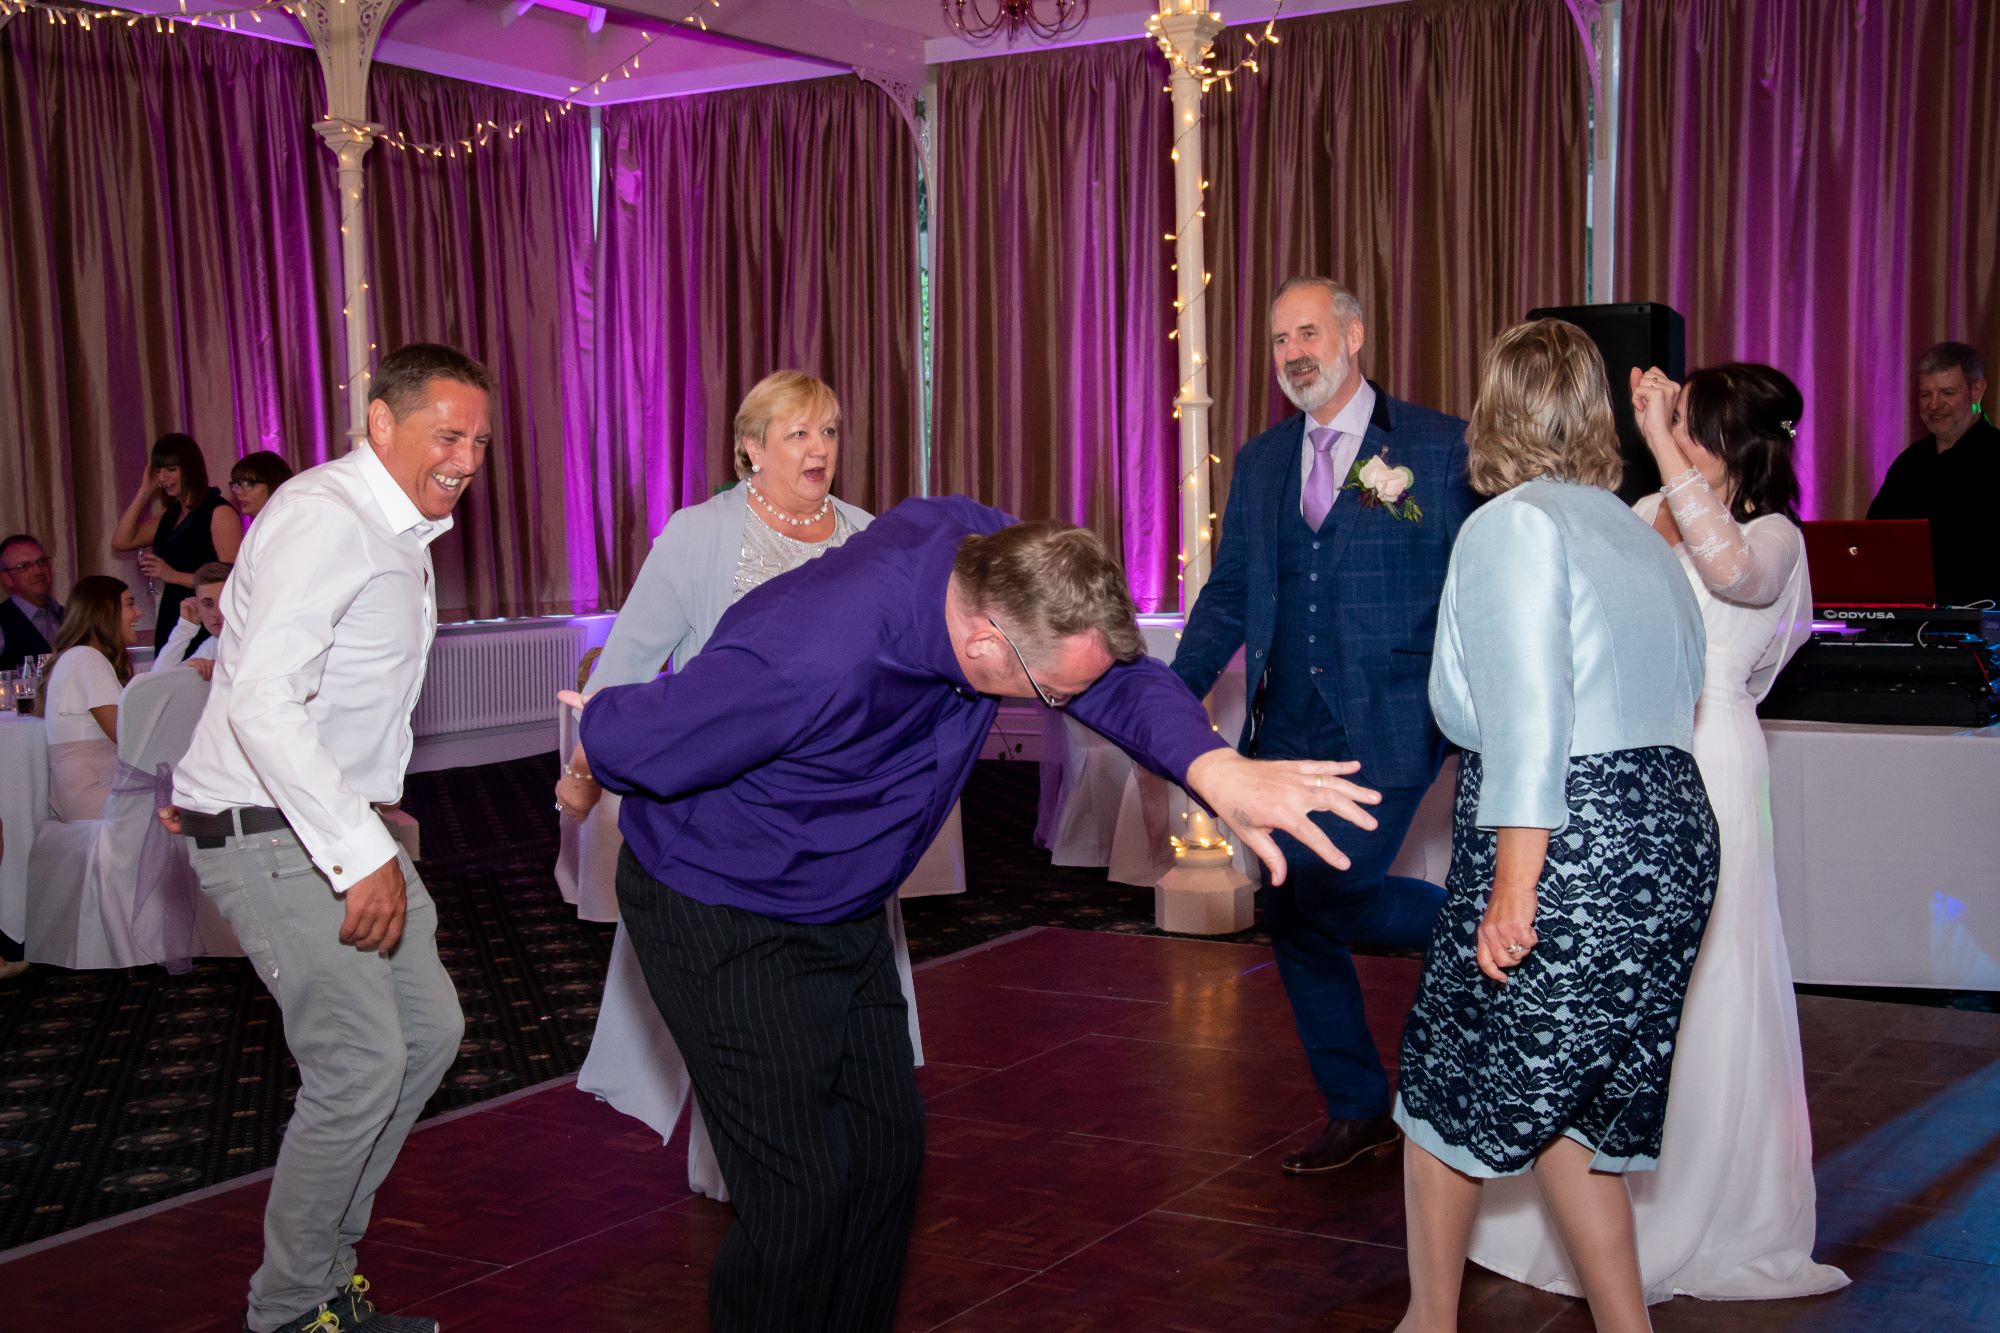 The bride and groom dance along with guests as one man pretends he's an elephant.